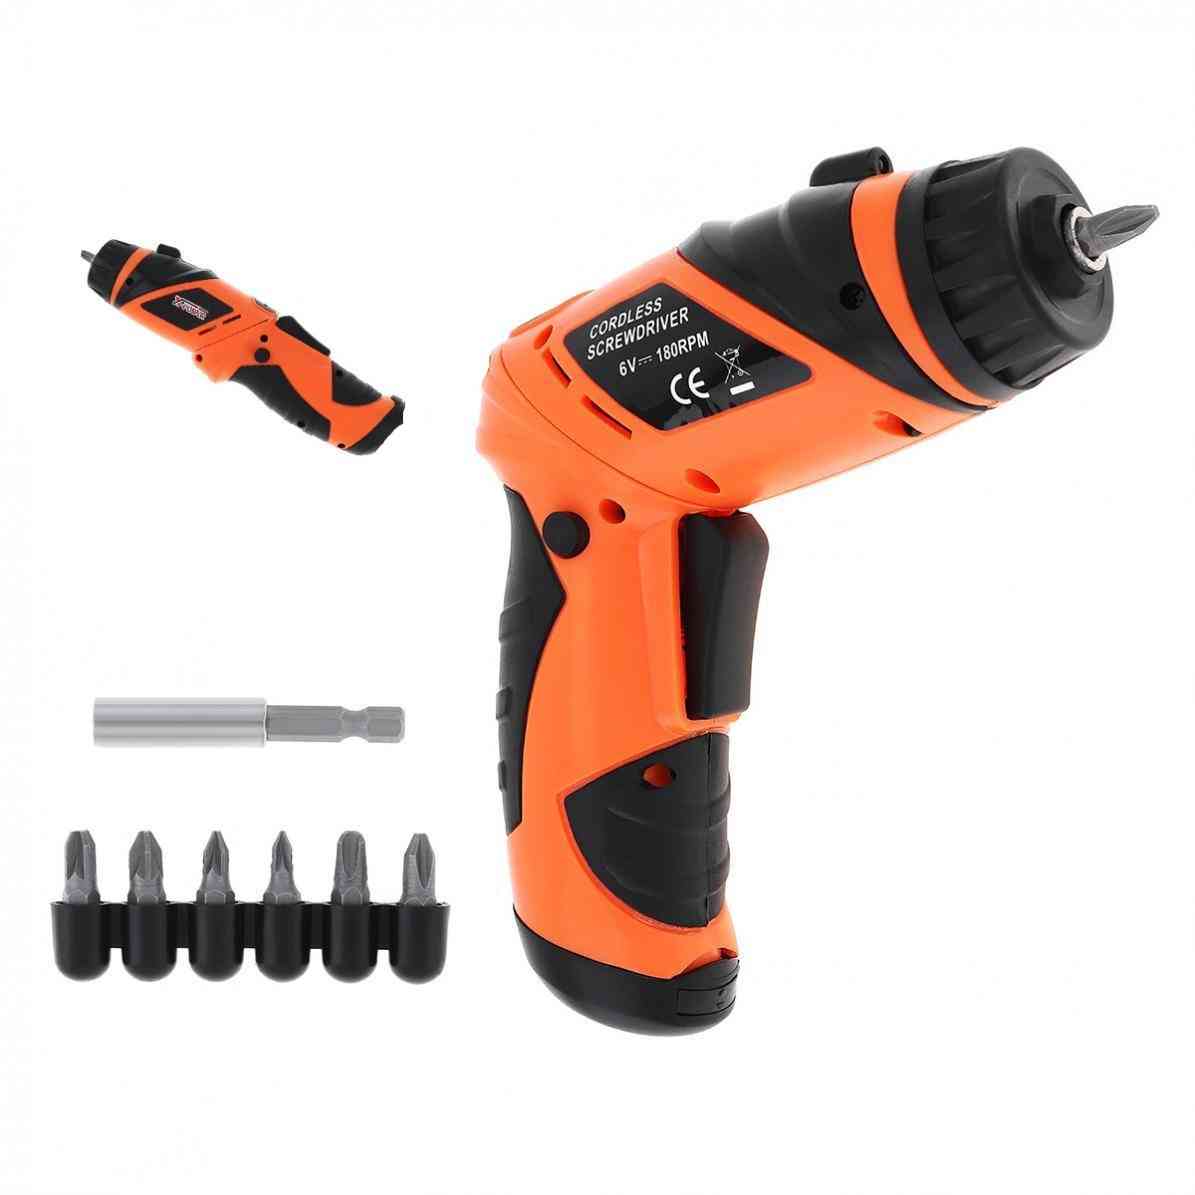 Mini- Electric Screwdriver, Power Dry Cell Tool